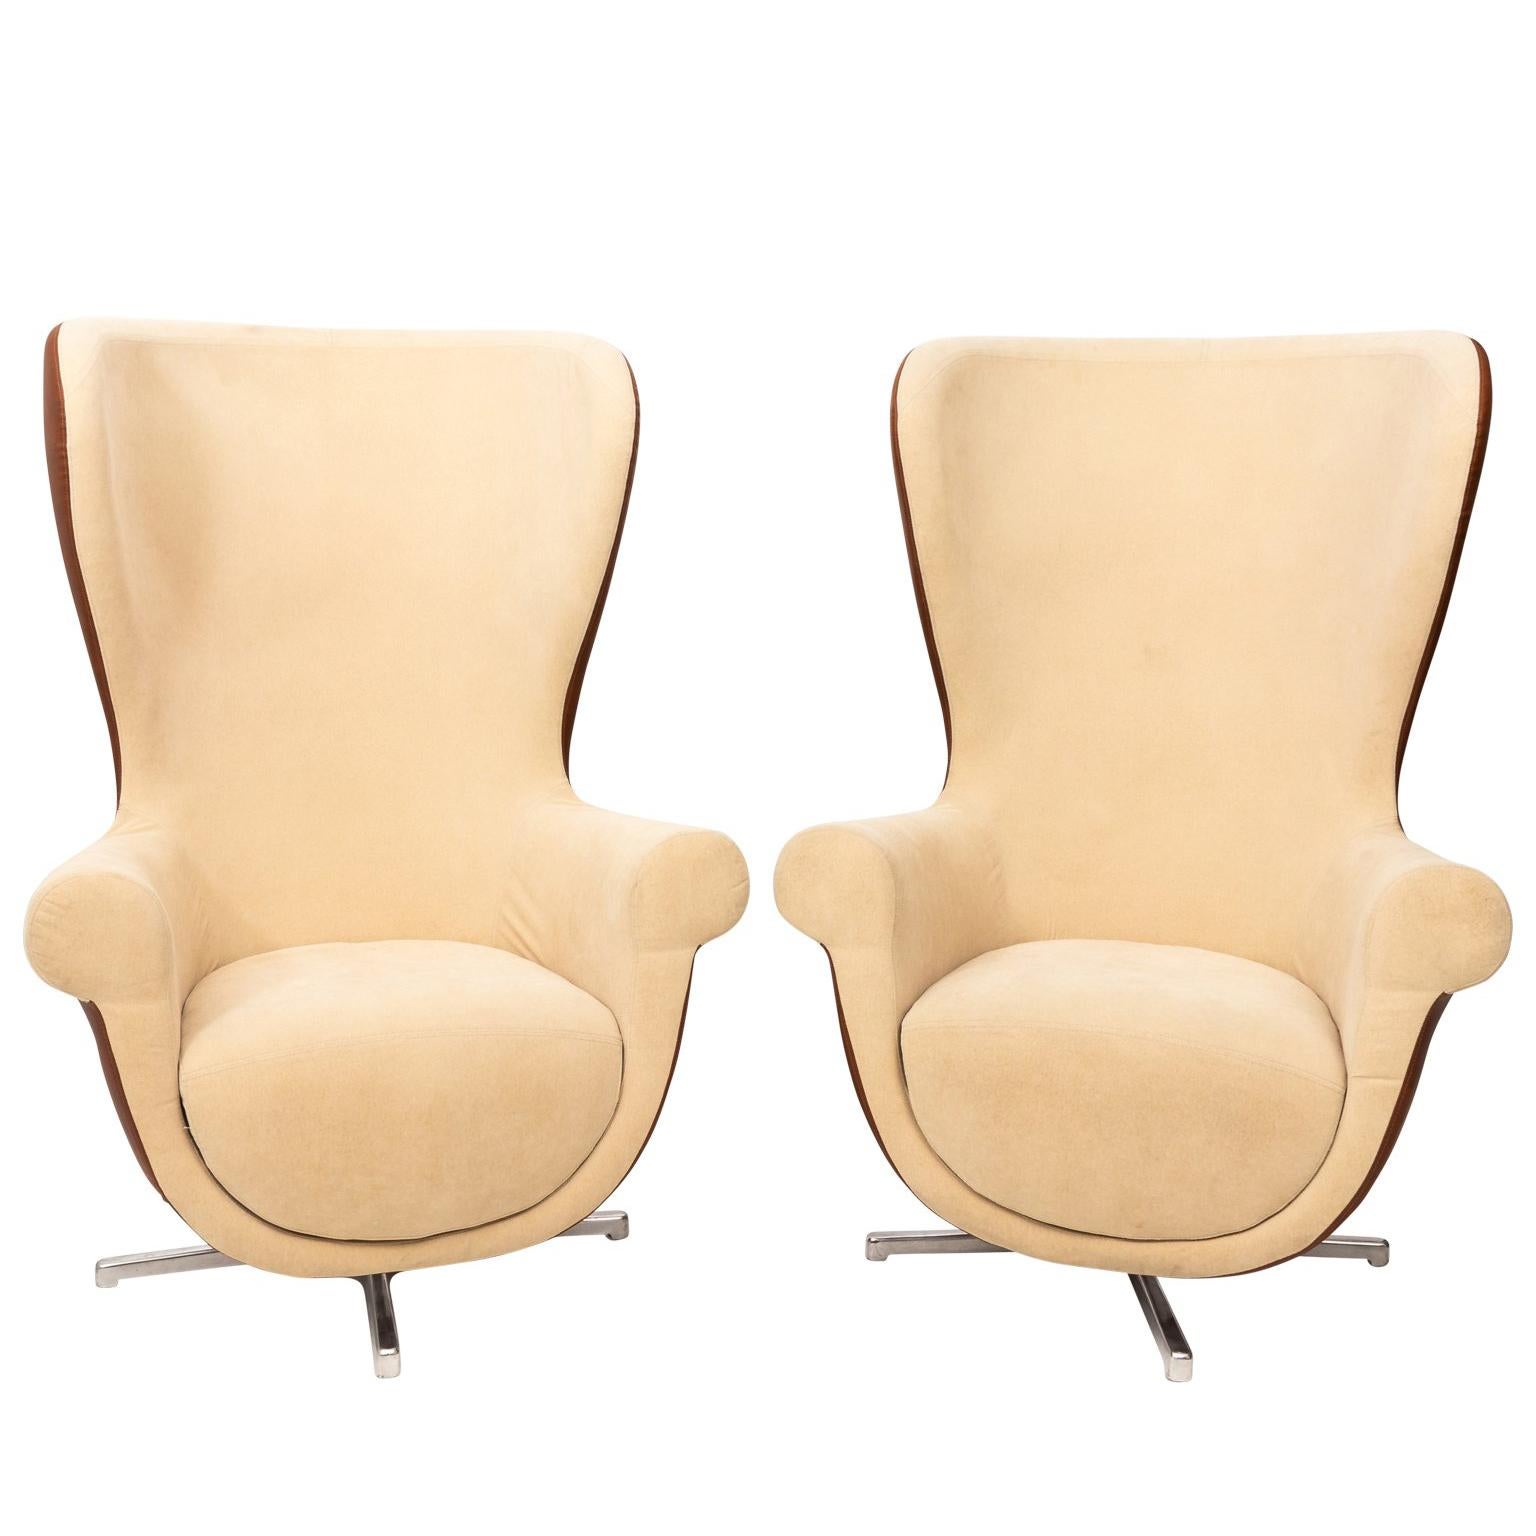 Pair of Mid-Century Modern "Egg Chairs"